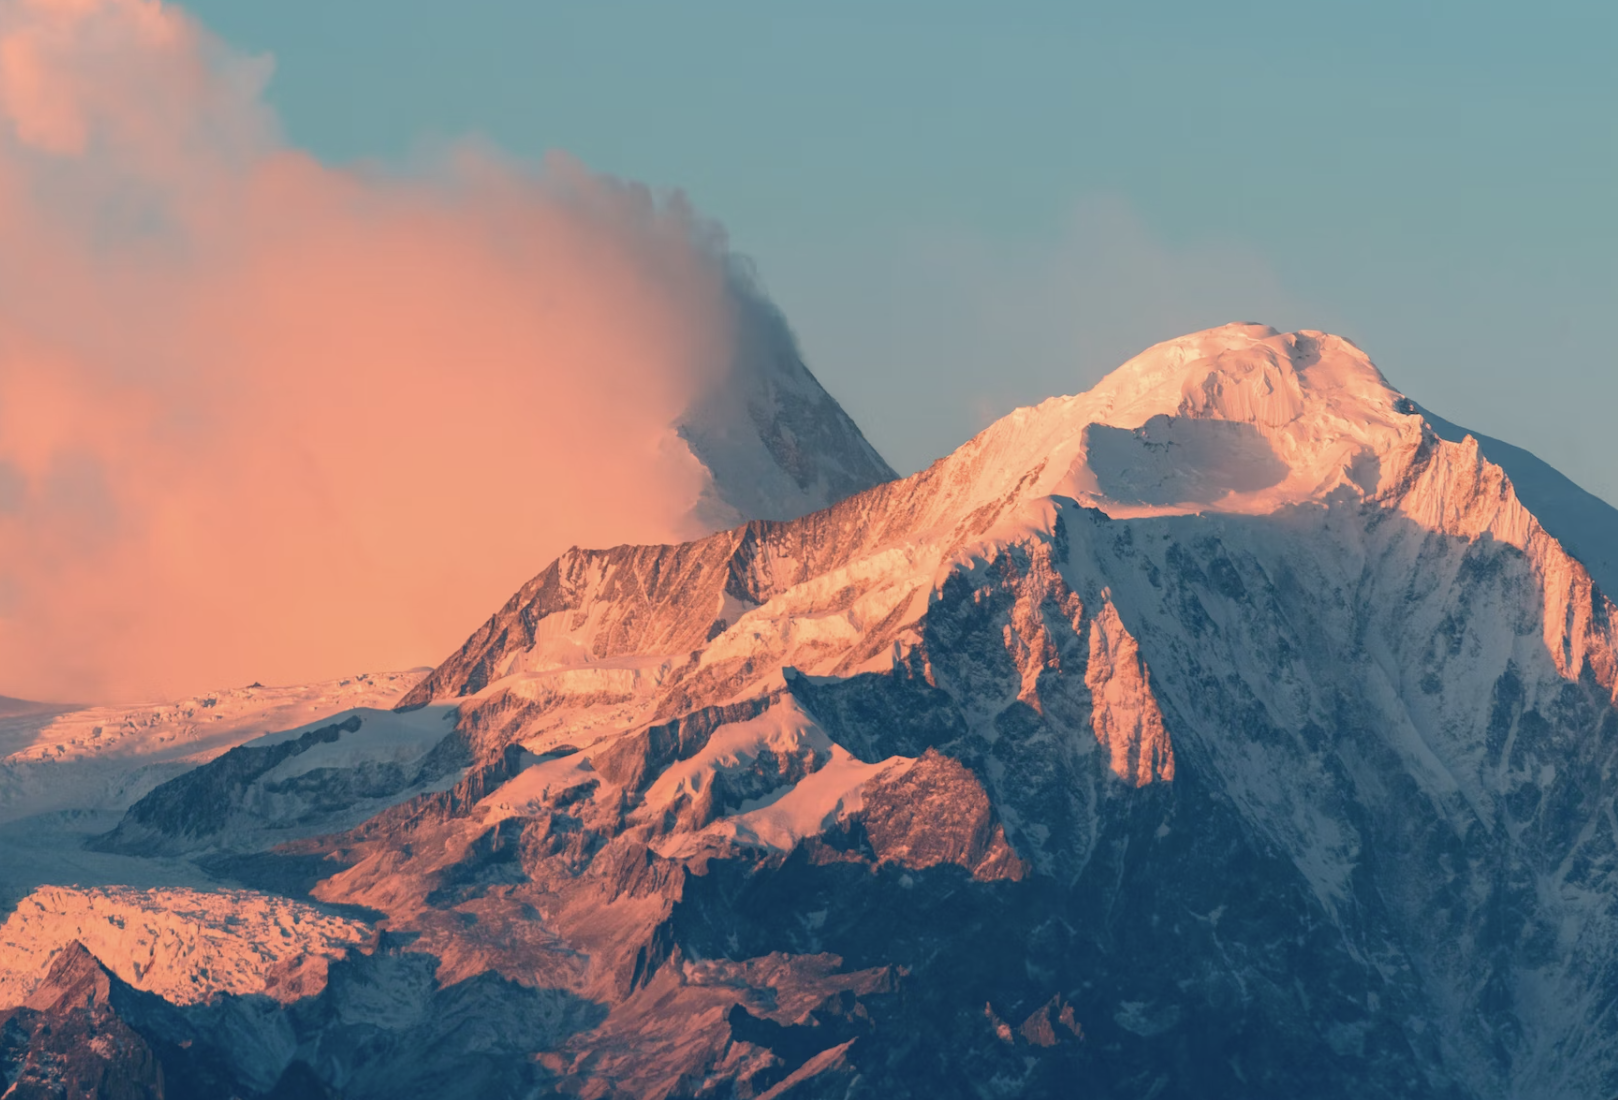 Mountain with a snowy peak and a pink cloud sky